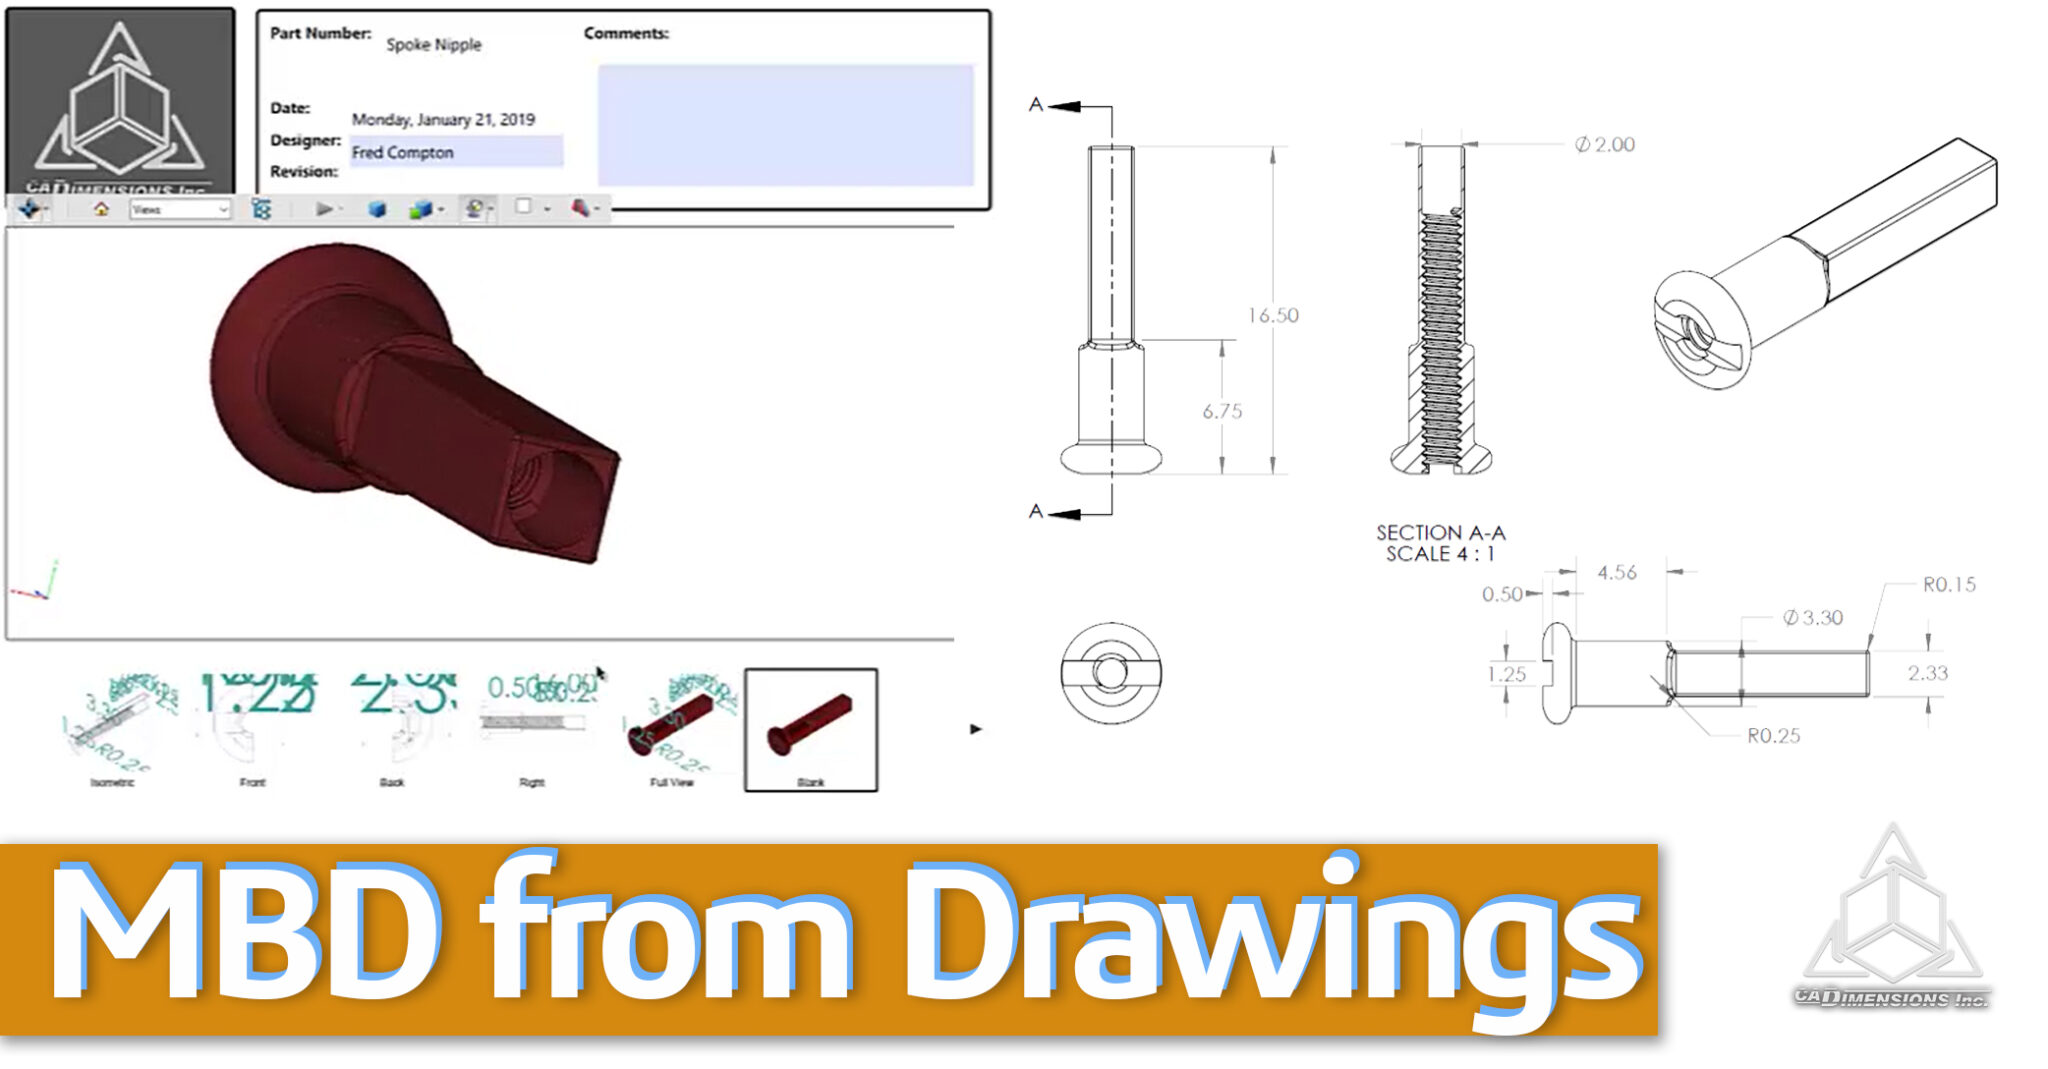 Solidworks Drawings to MBD